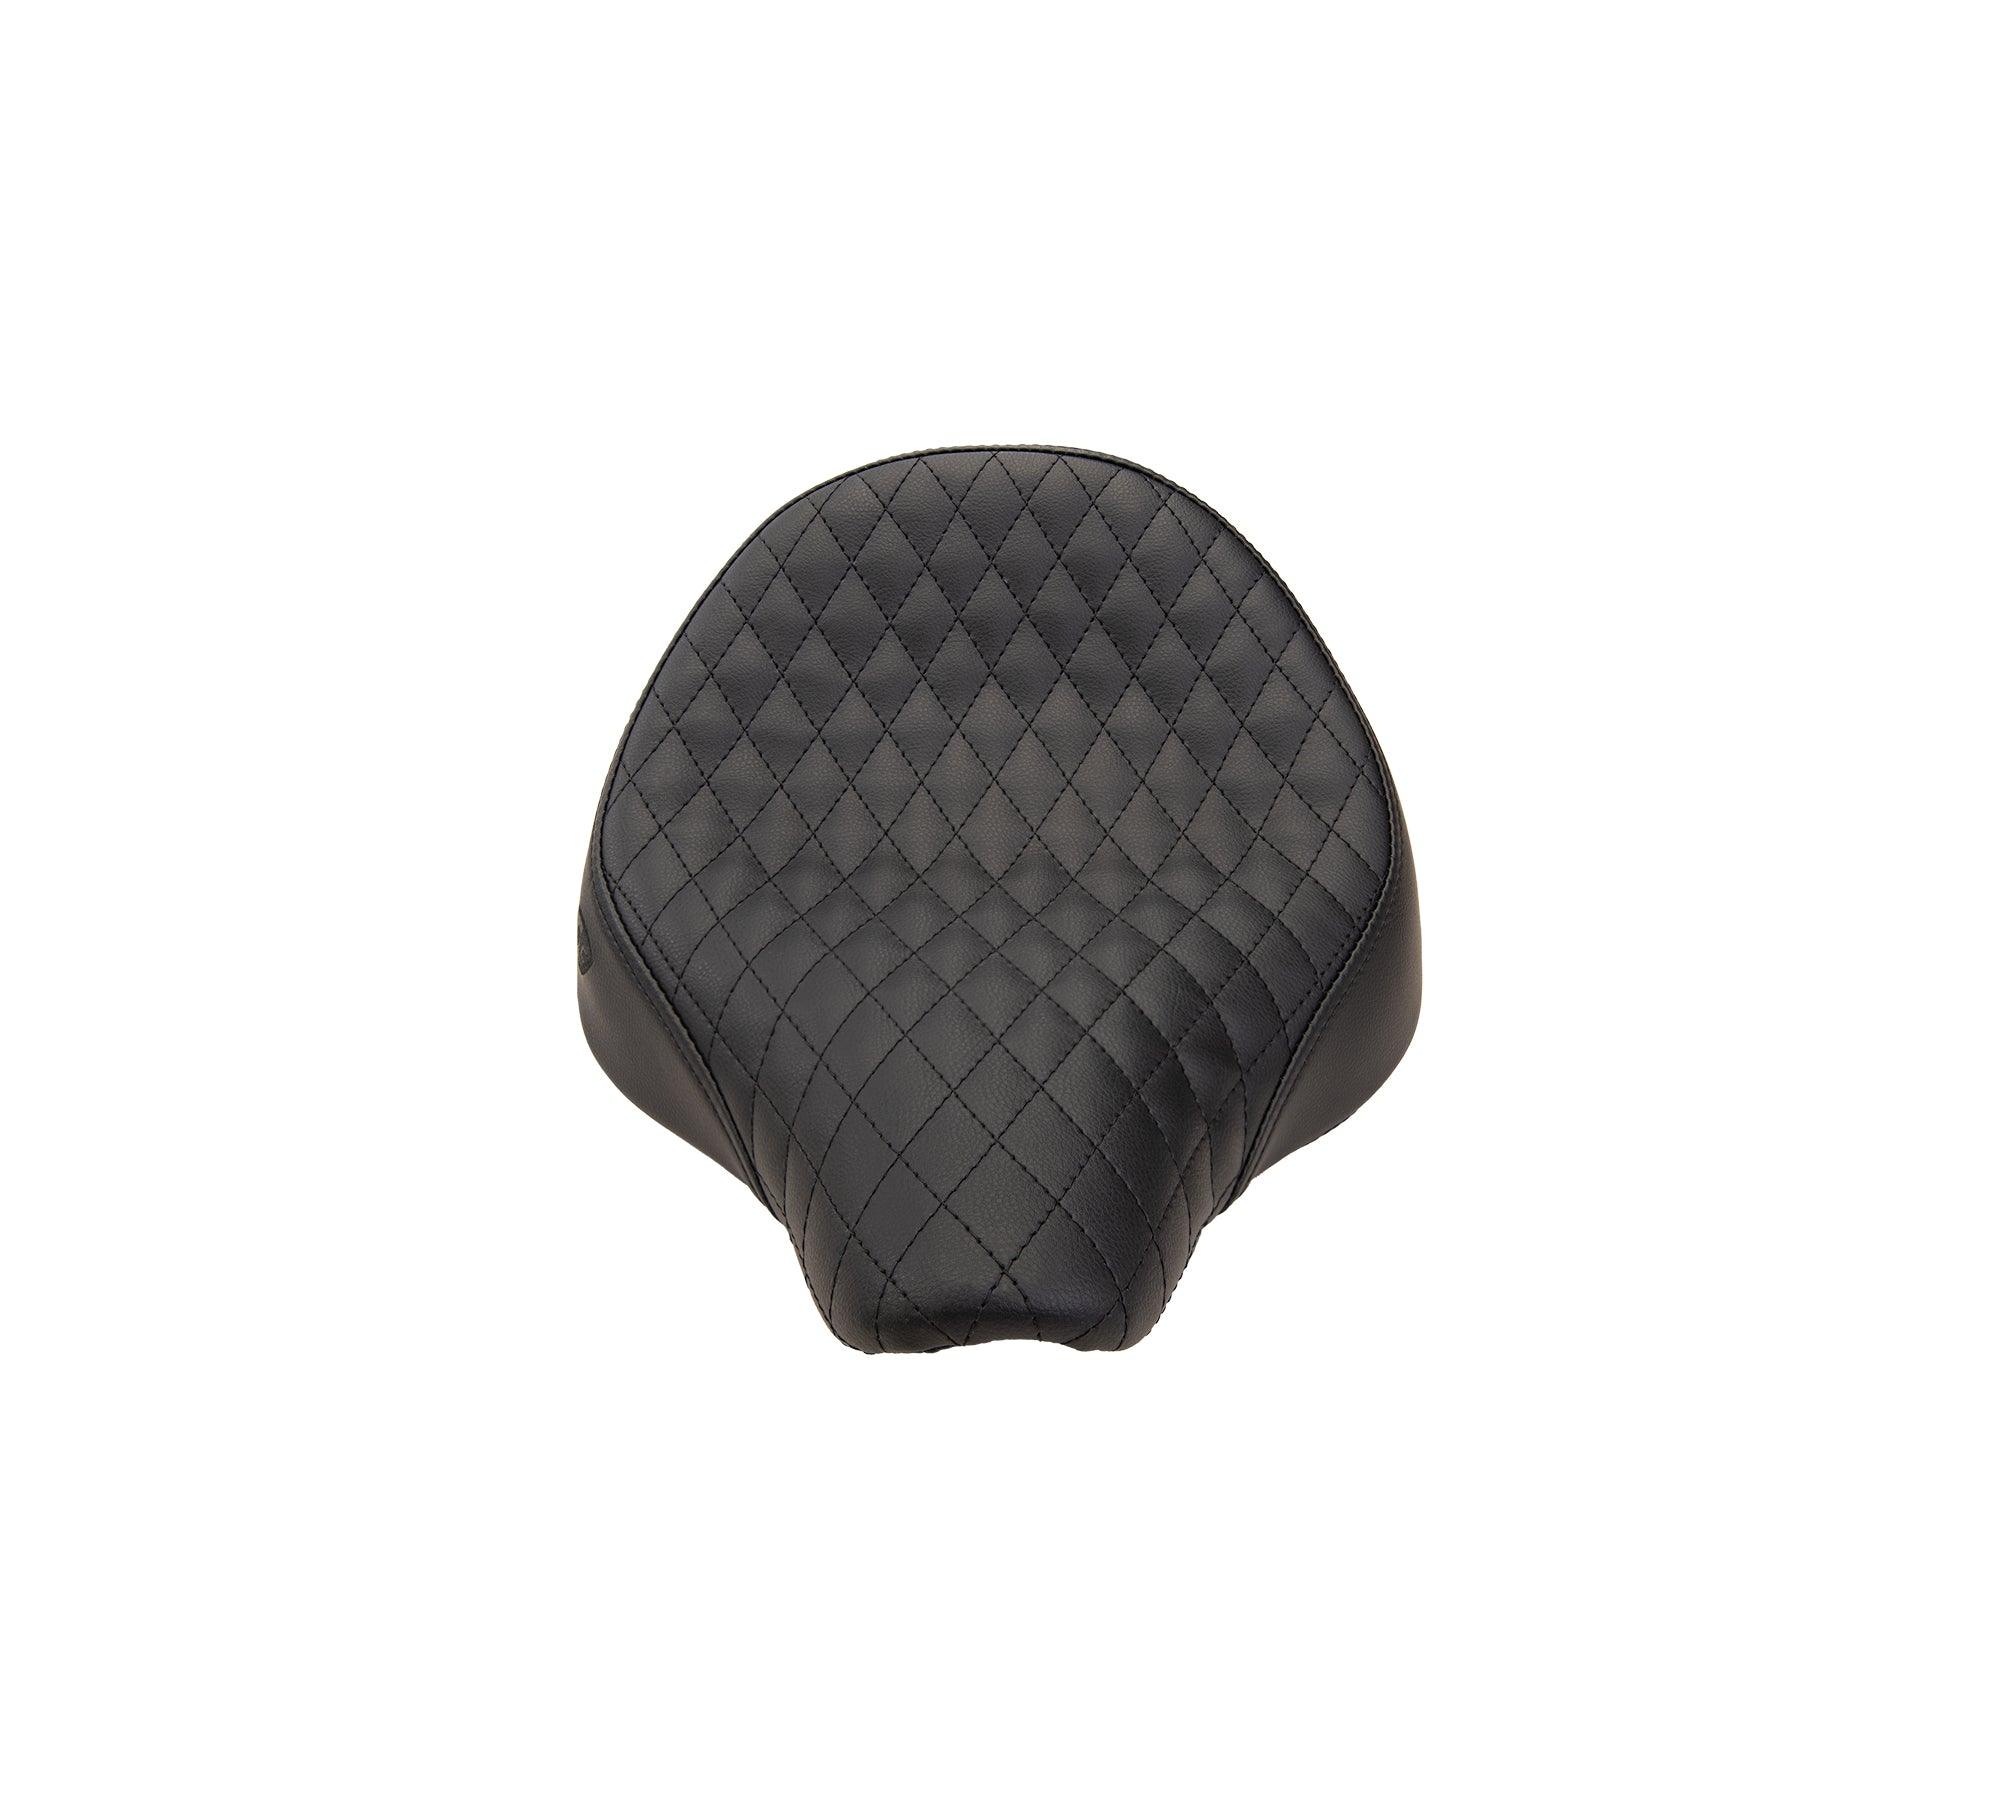 Best Solo Gel Seat for Triumph Motorcycles